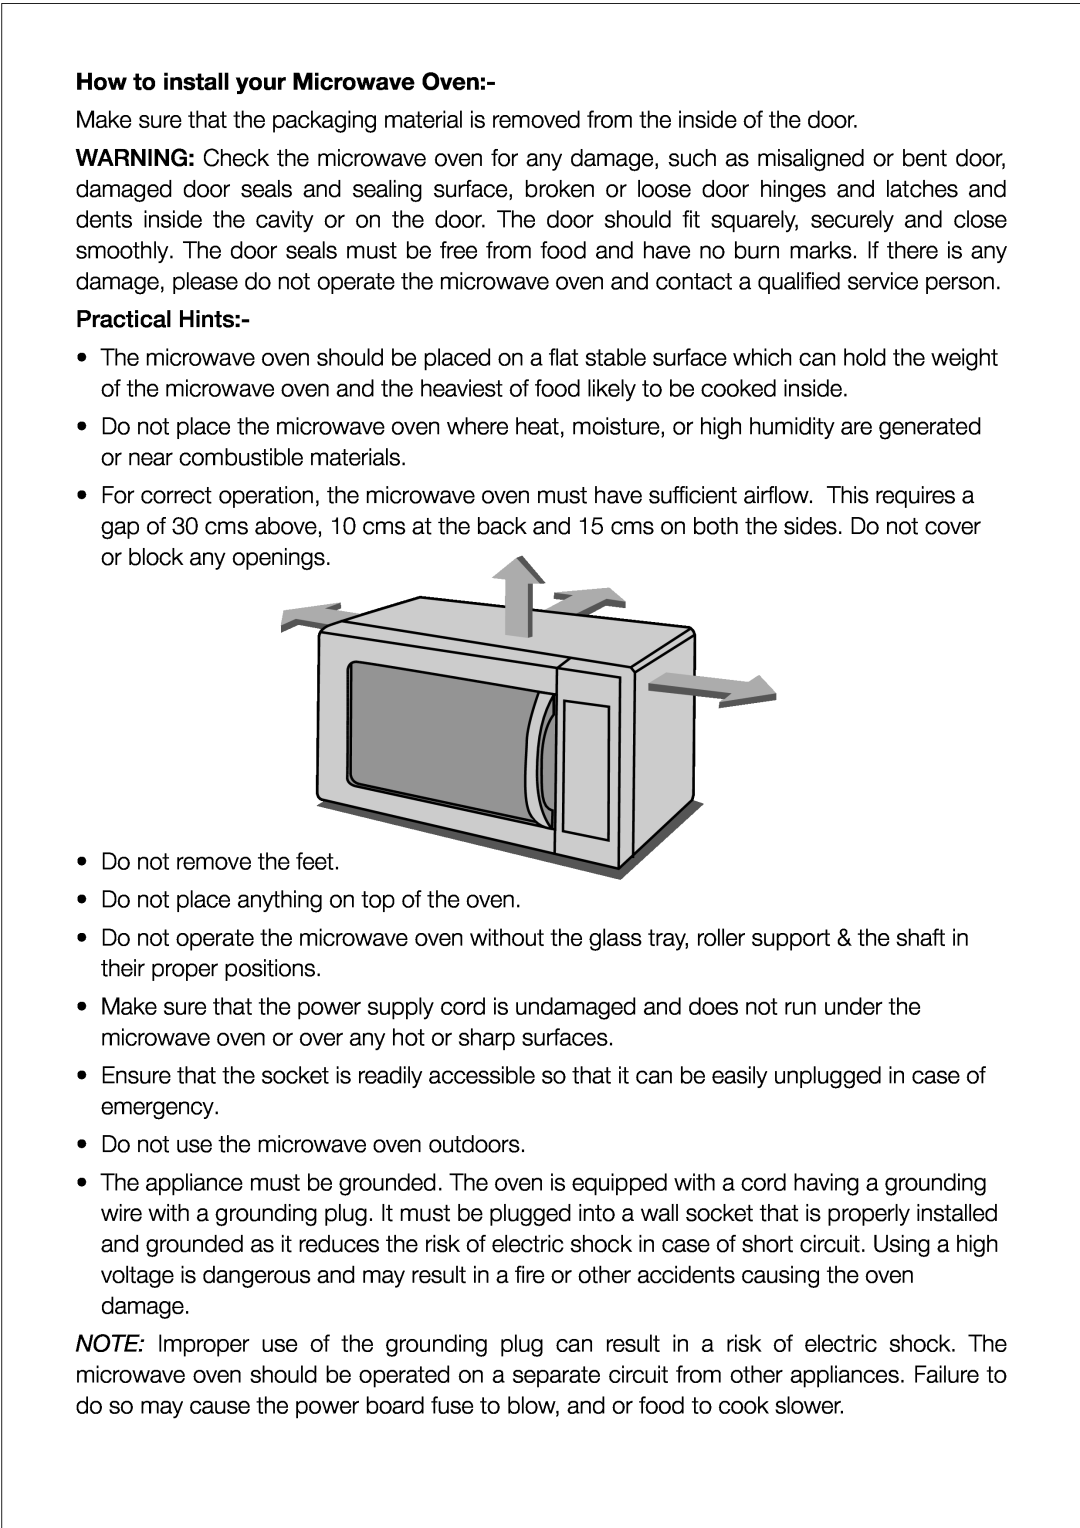 Black & Decker MY23PG manual How to install your Microwave Oven 